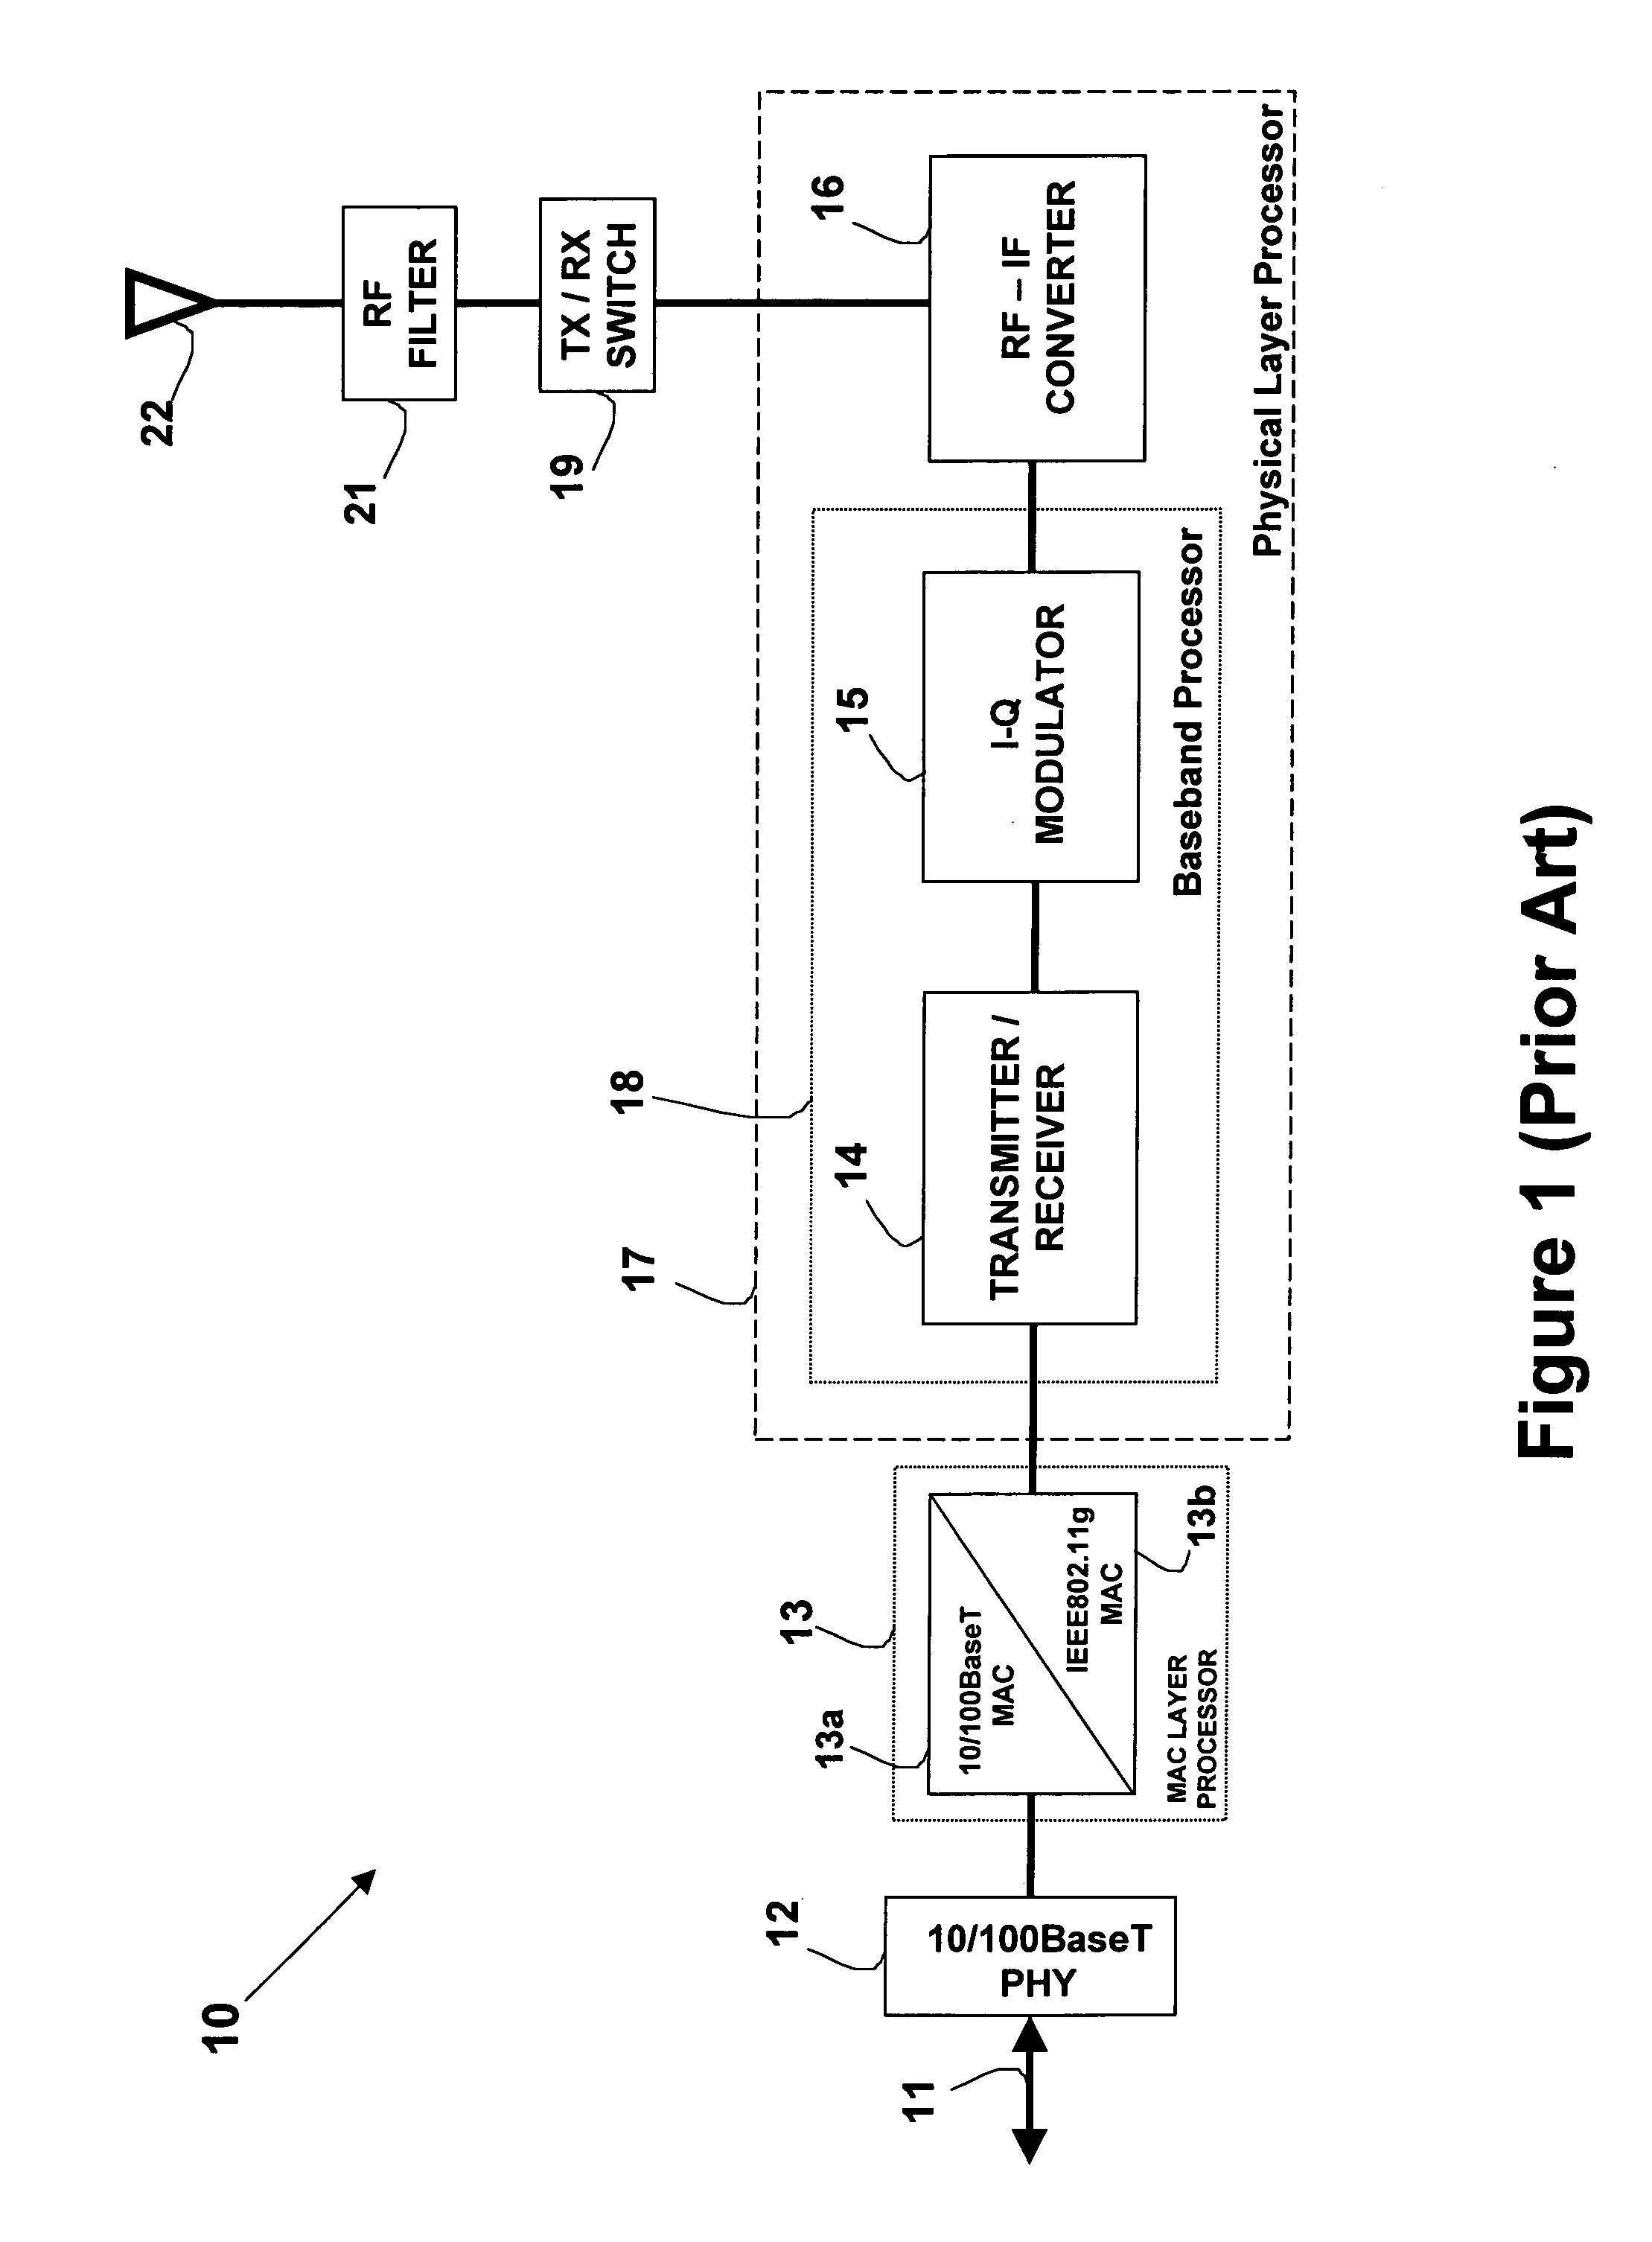 System and method for carrying a wireless based signal over wiring